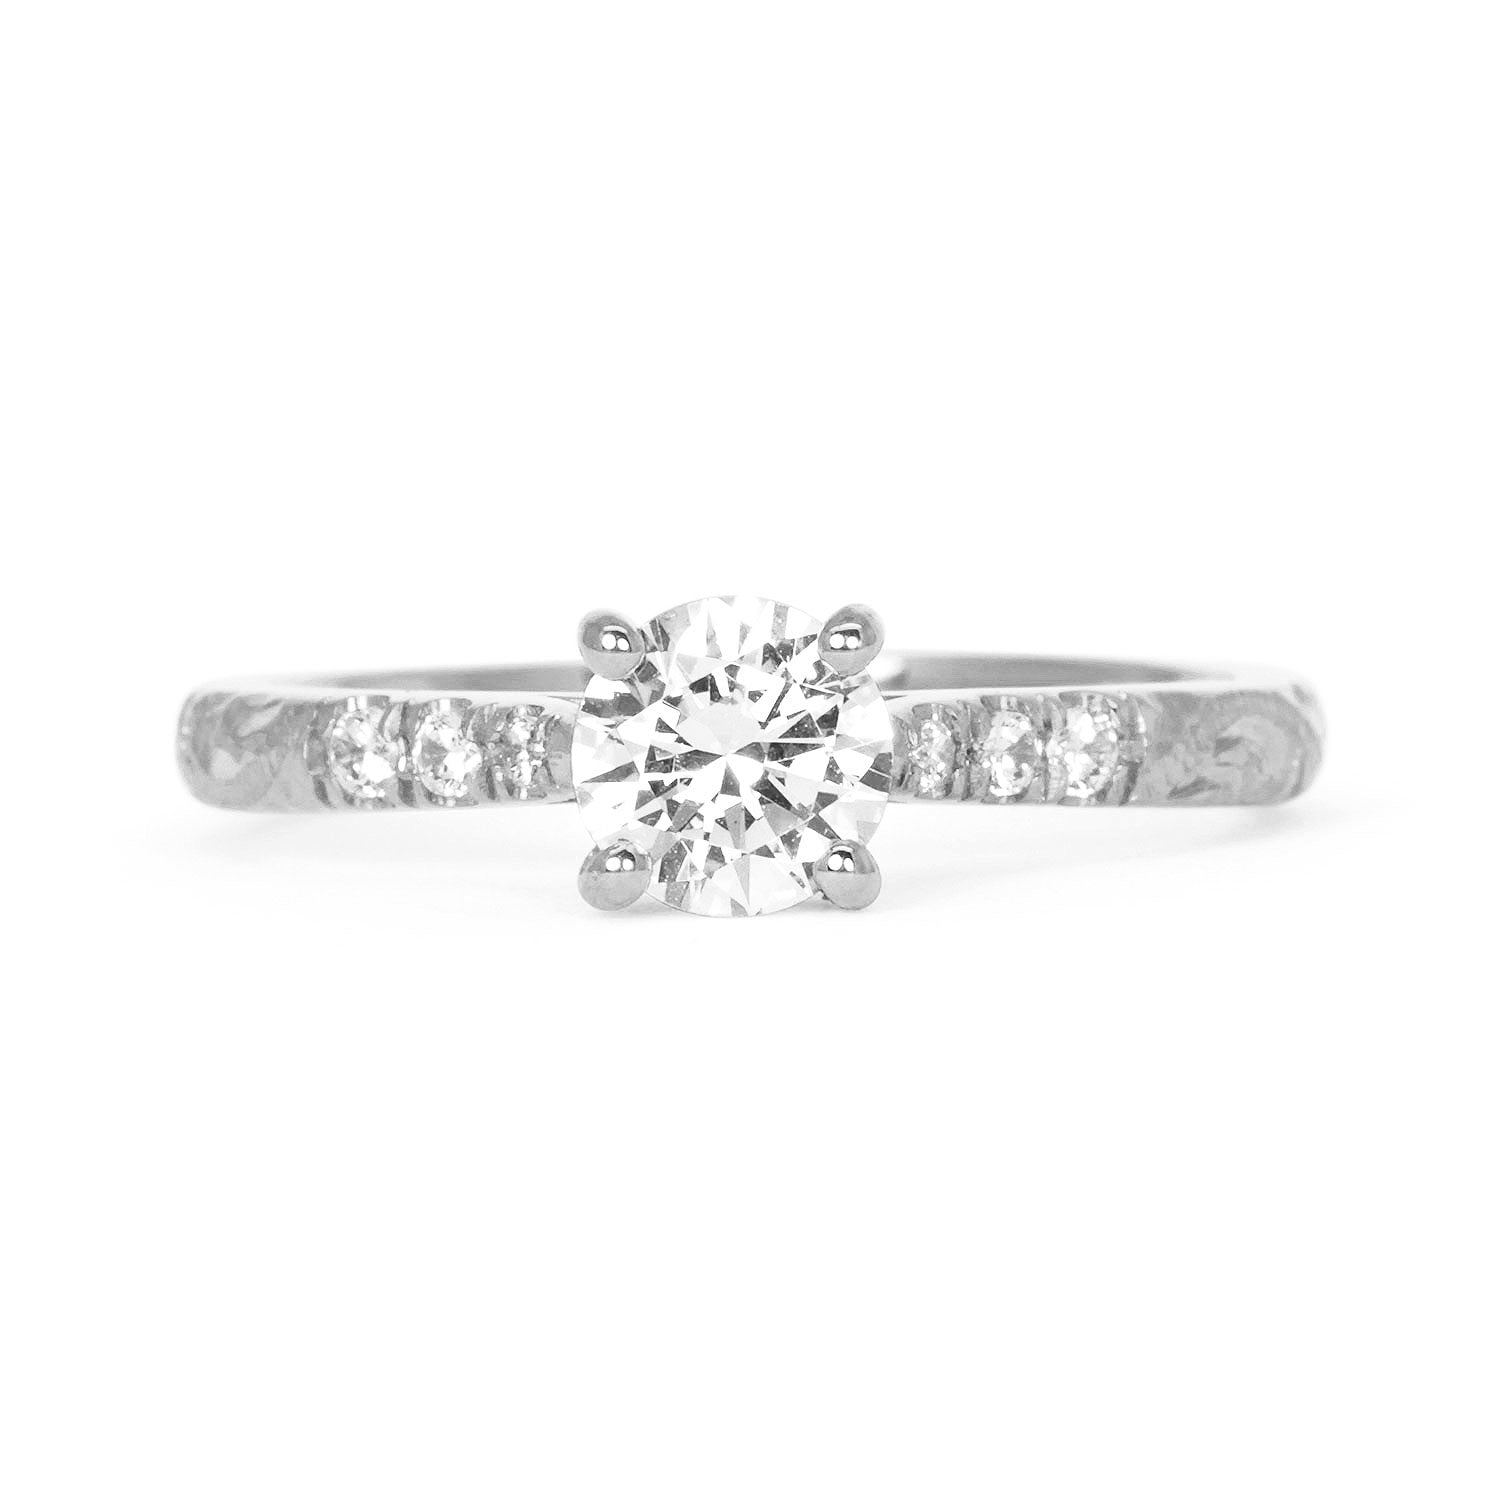 Athena Grande Stella Ethical Diamond Solitaire Engagement Ring, recycled platinum and conflict-free diamonds